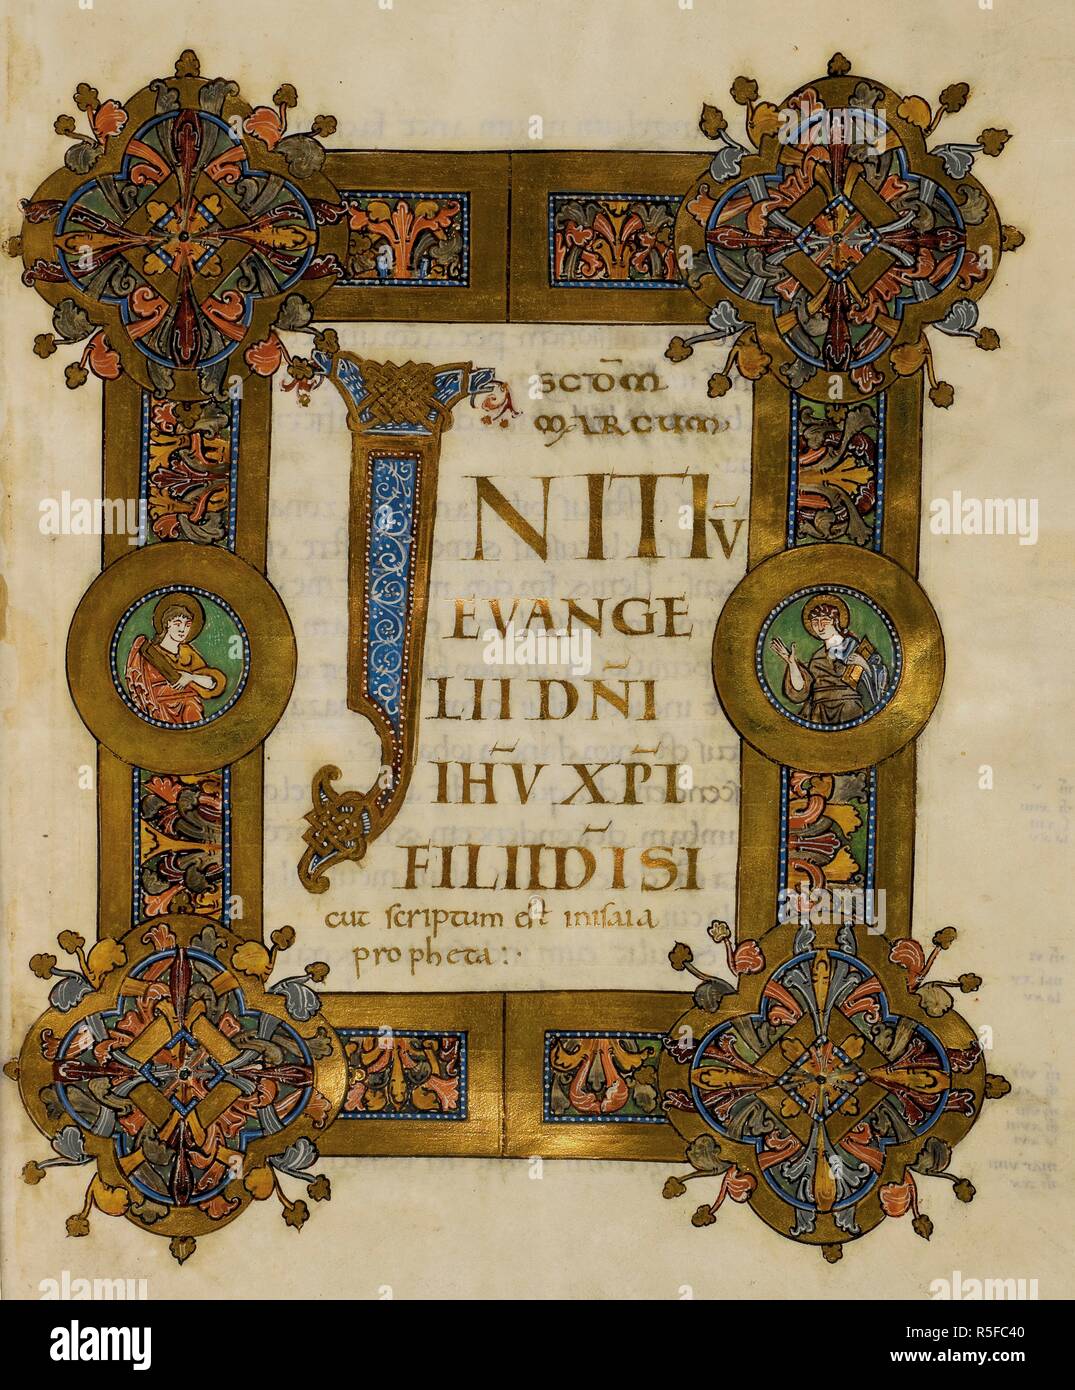 Initial 'I'(nitium) with interlace decoration and display script in gold, framed by a 'Winchester style' foliate border with two medallions with saints holding books (Evangelists?), at the beginning of Mark. Gospels (the 'Cnut Gospels'). England, S. E. (Christ Church, Canterbury); 1st quarter of the 11th century (c. 1020). Source: Royal 1 D. IX, f.45. Language: Latin. Stock Photo